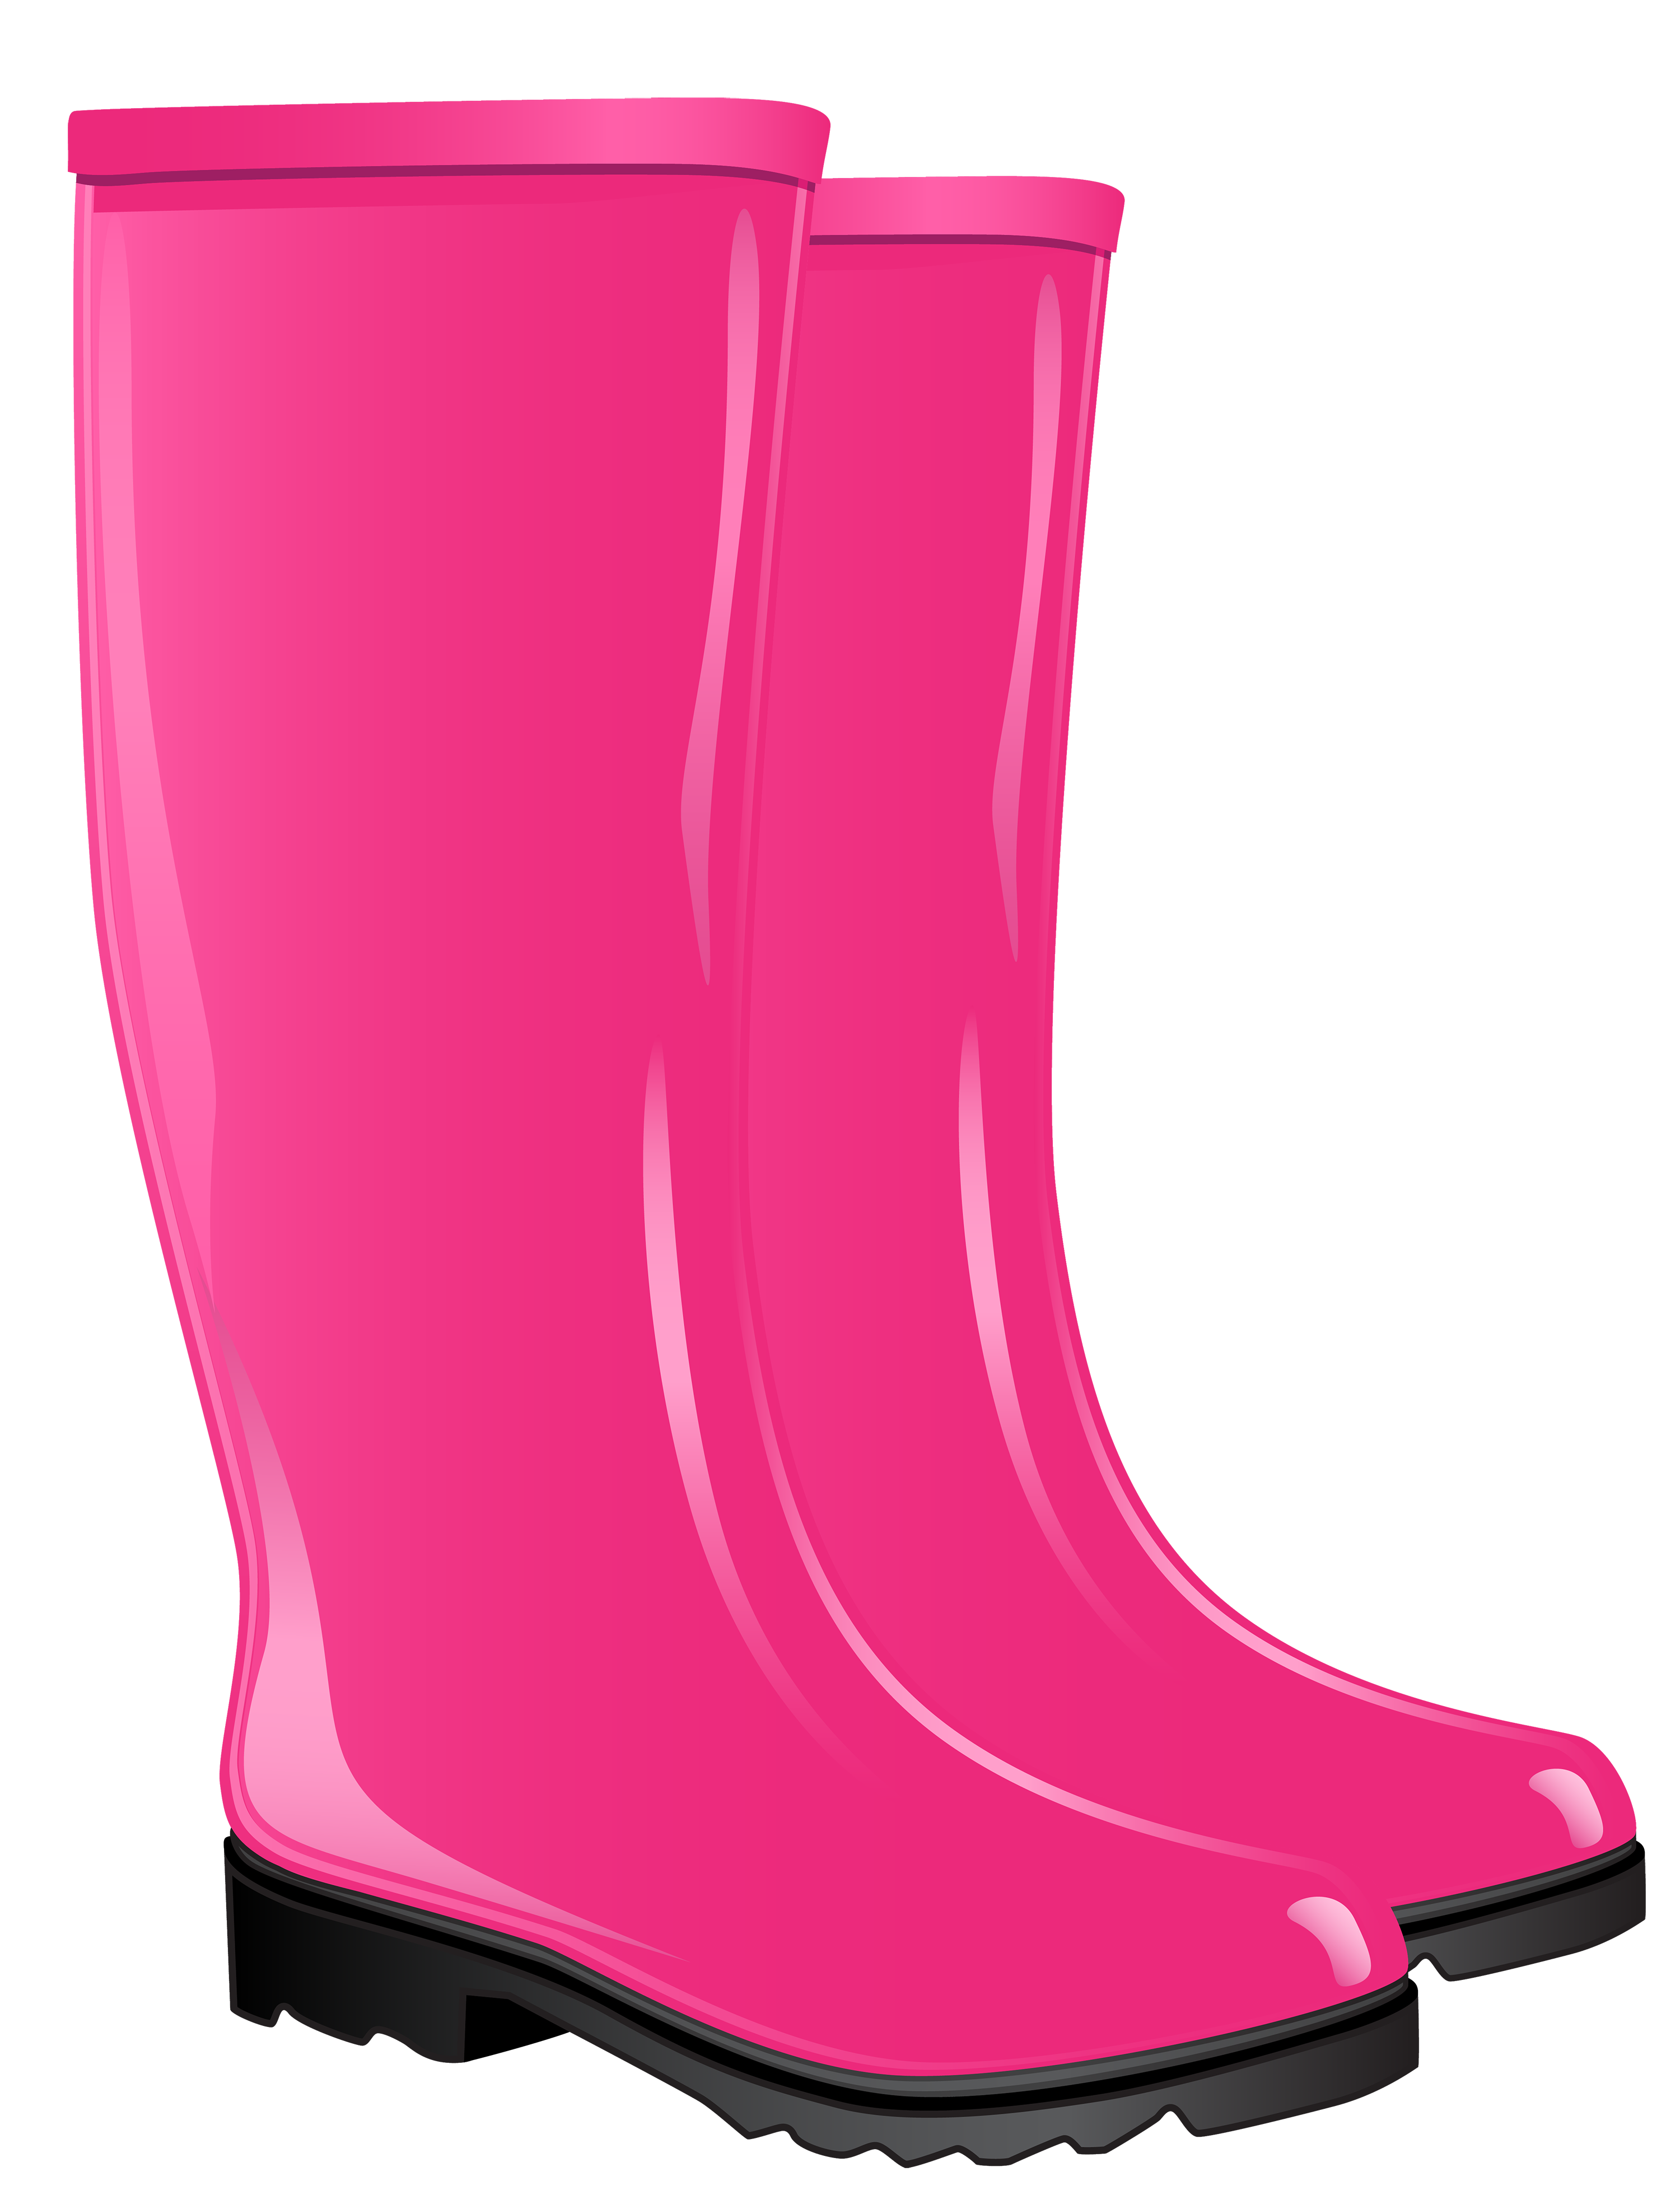 Pink Rubber Boots PNG Clipart.